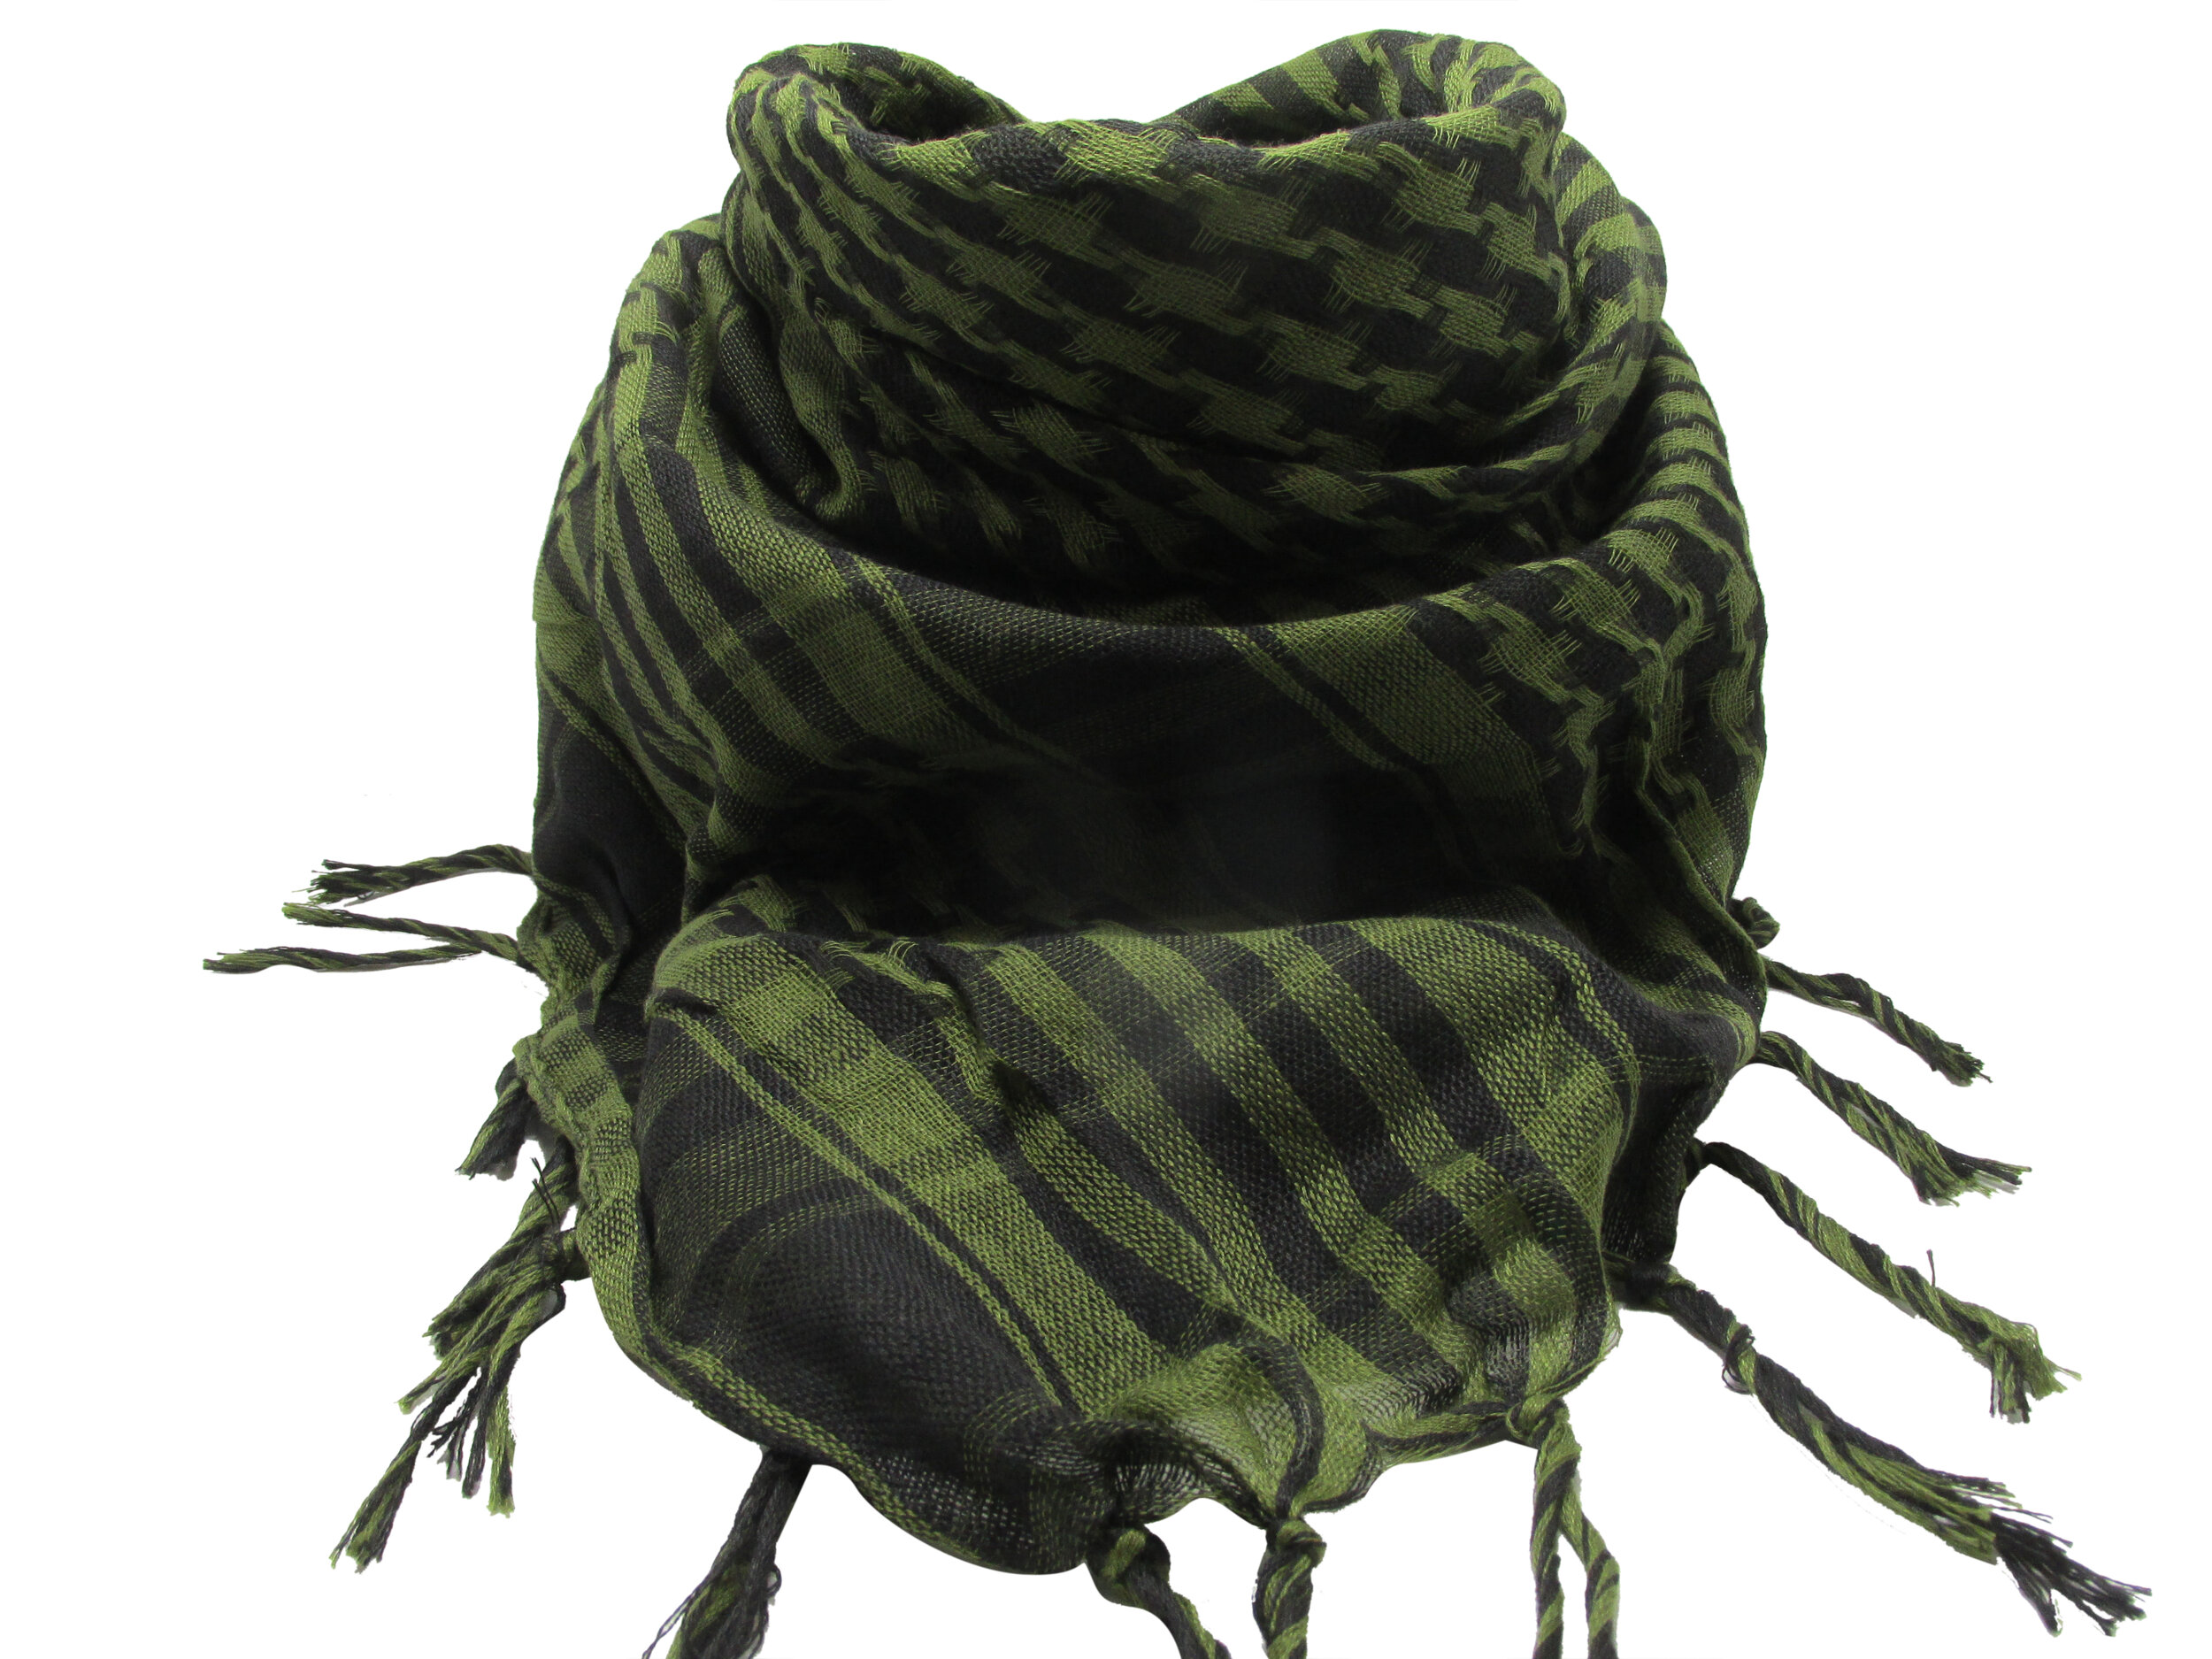 Buy Shemagh Olive/ Black Scarf at